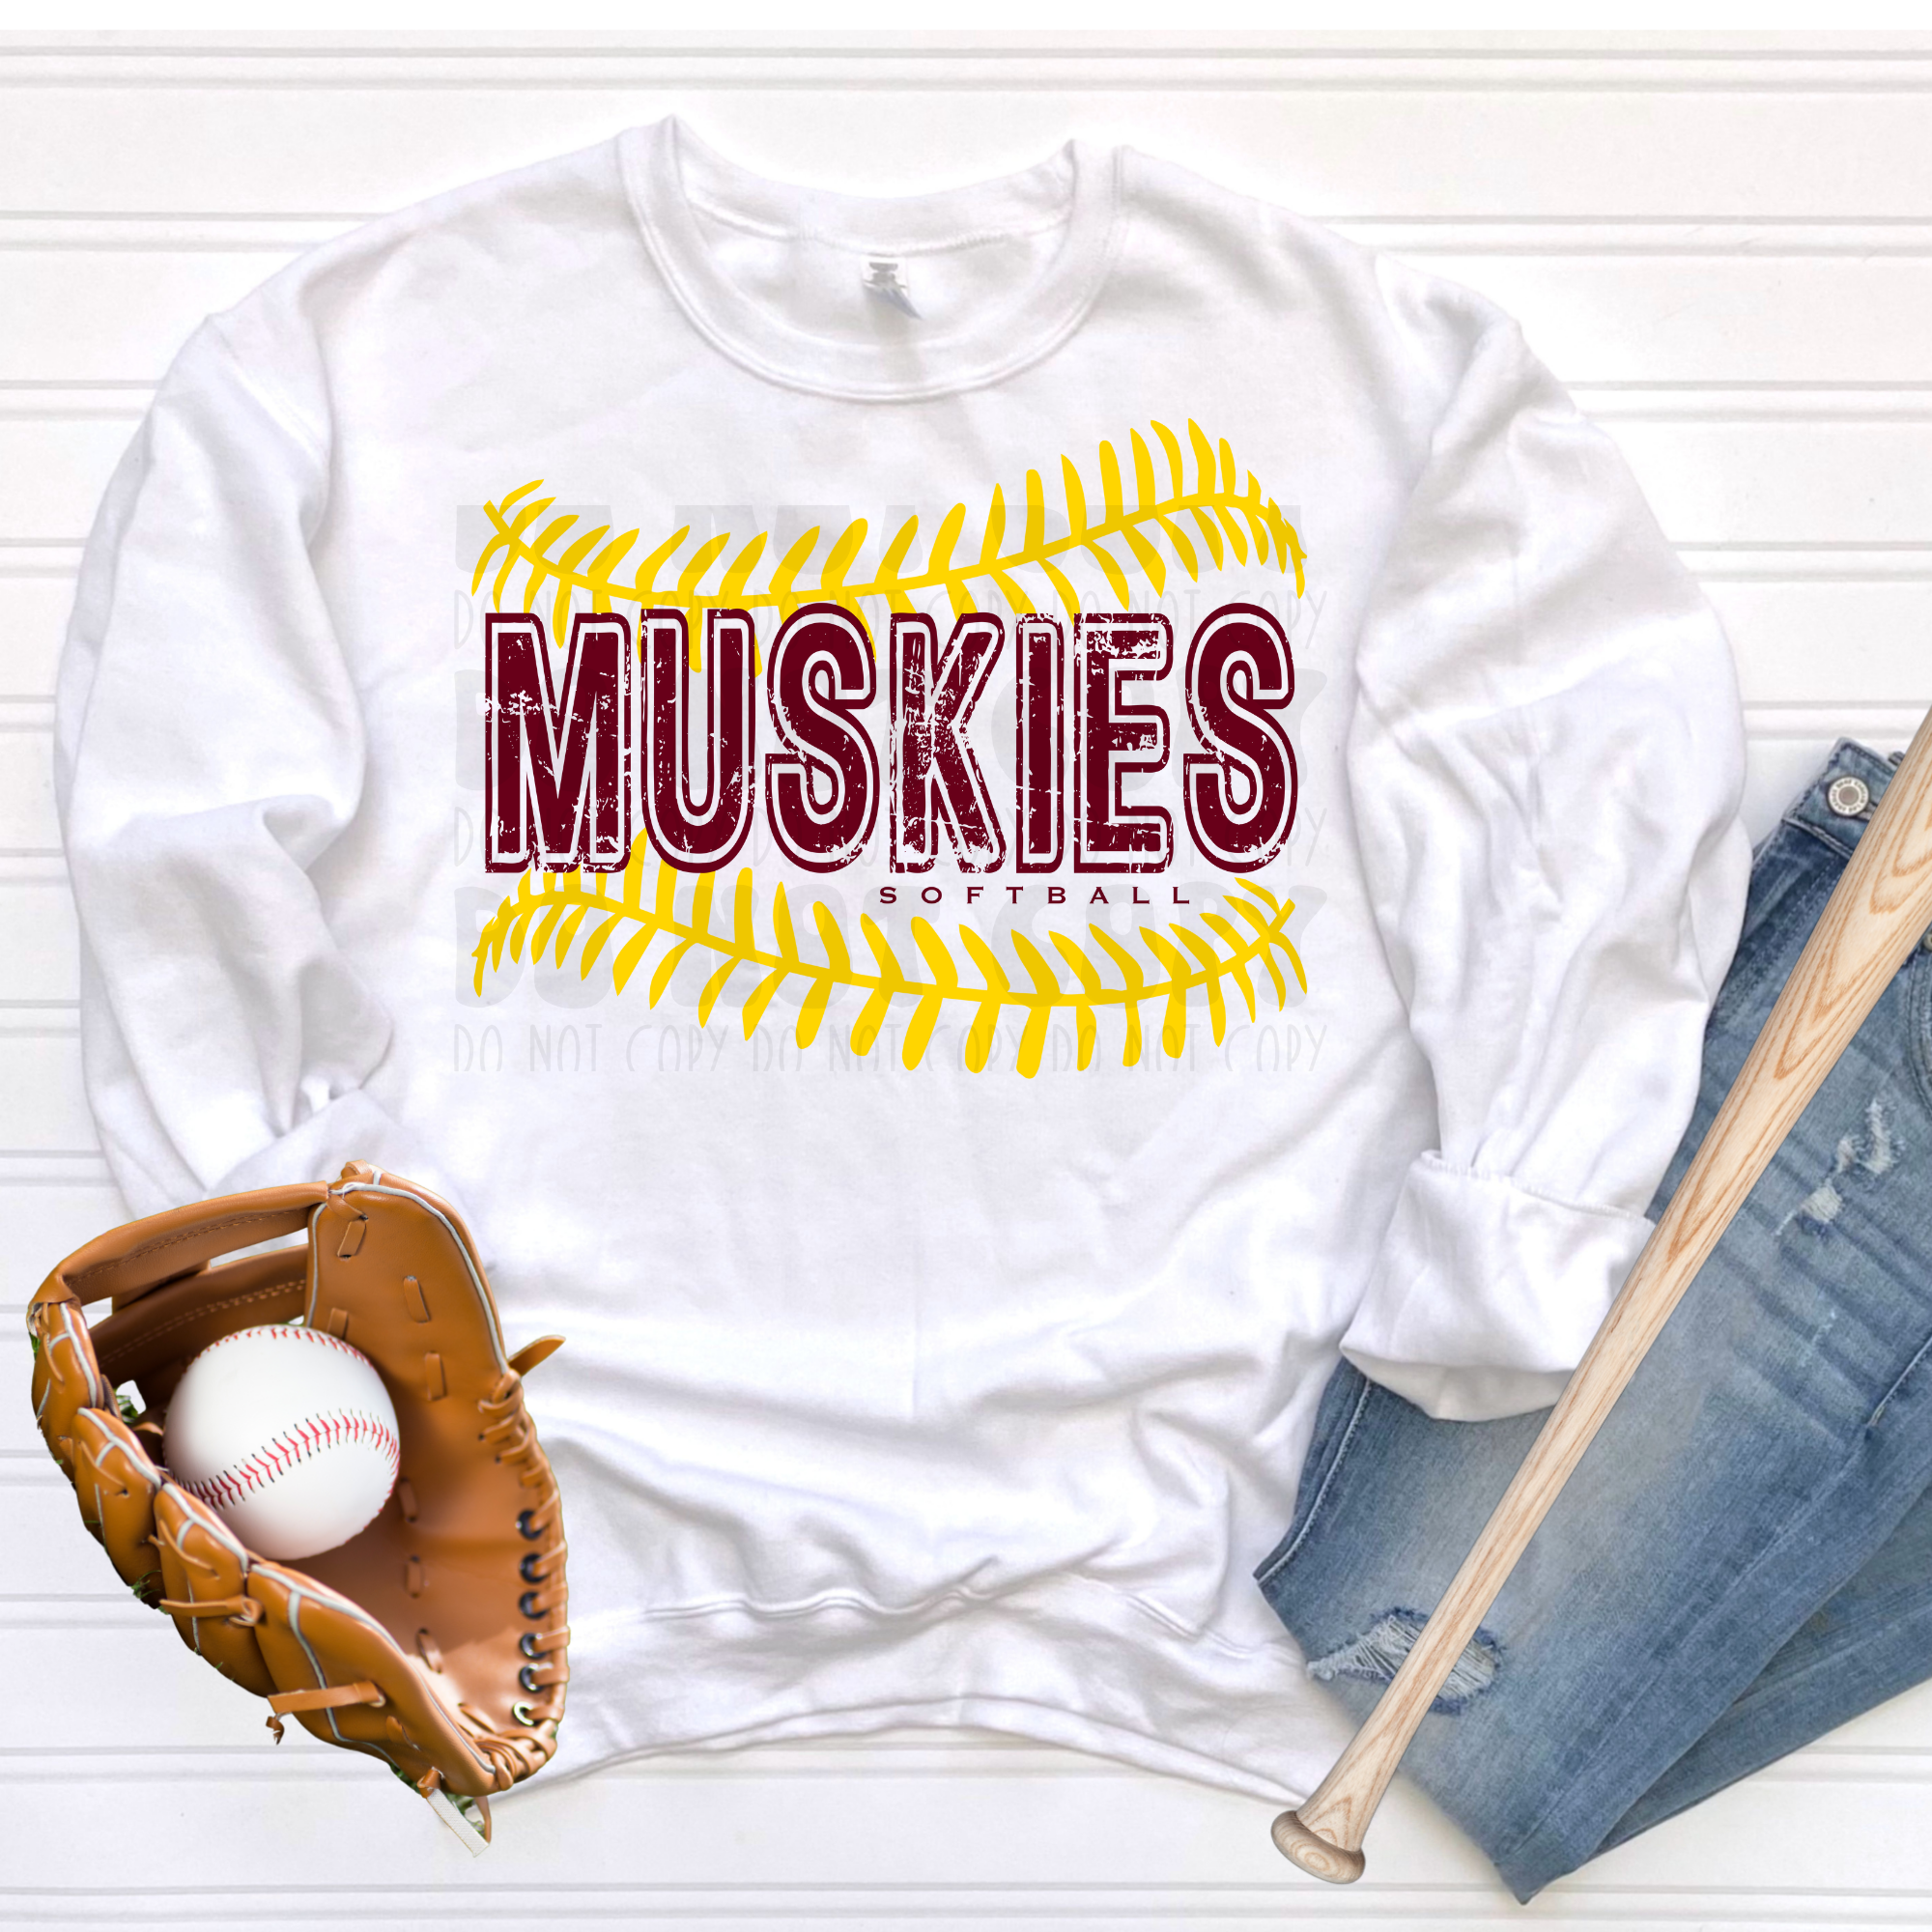 PRE-ORDER - MUSKIES SOFTBALL YOUTH - YOU CHOOSE COLOR